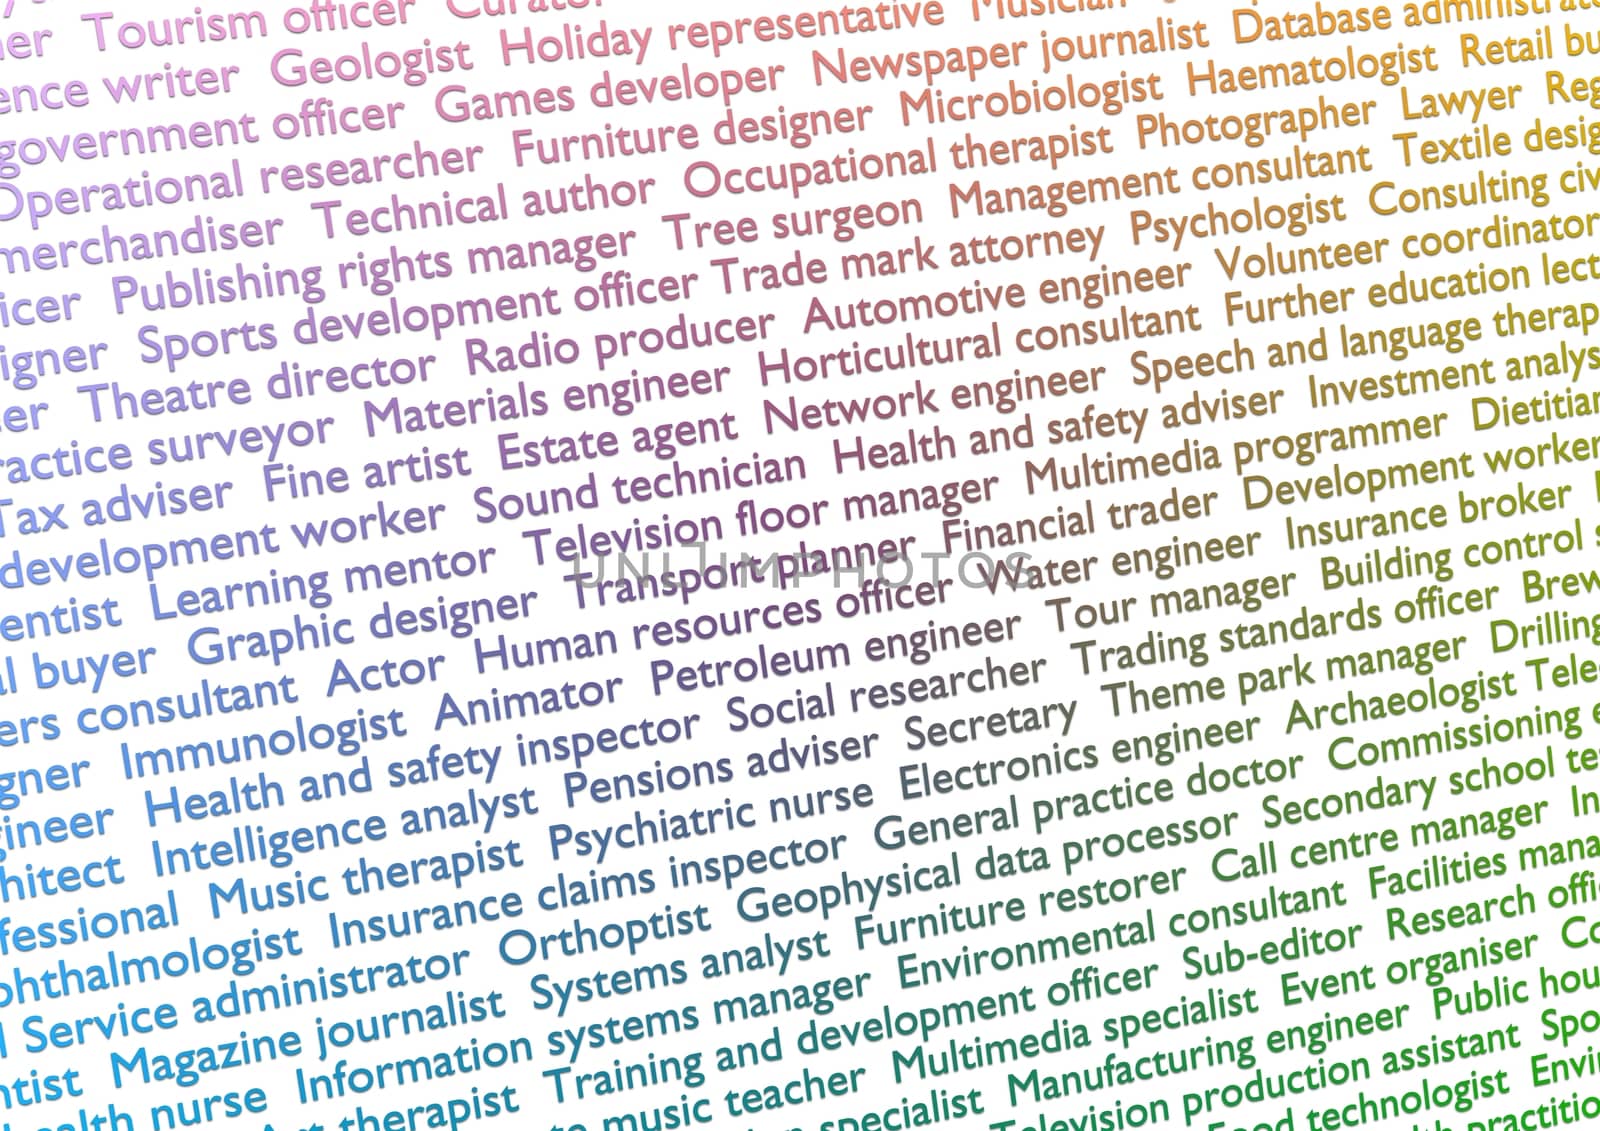 Illustration of lots of text showing titles of professions with gradient effect